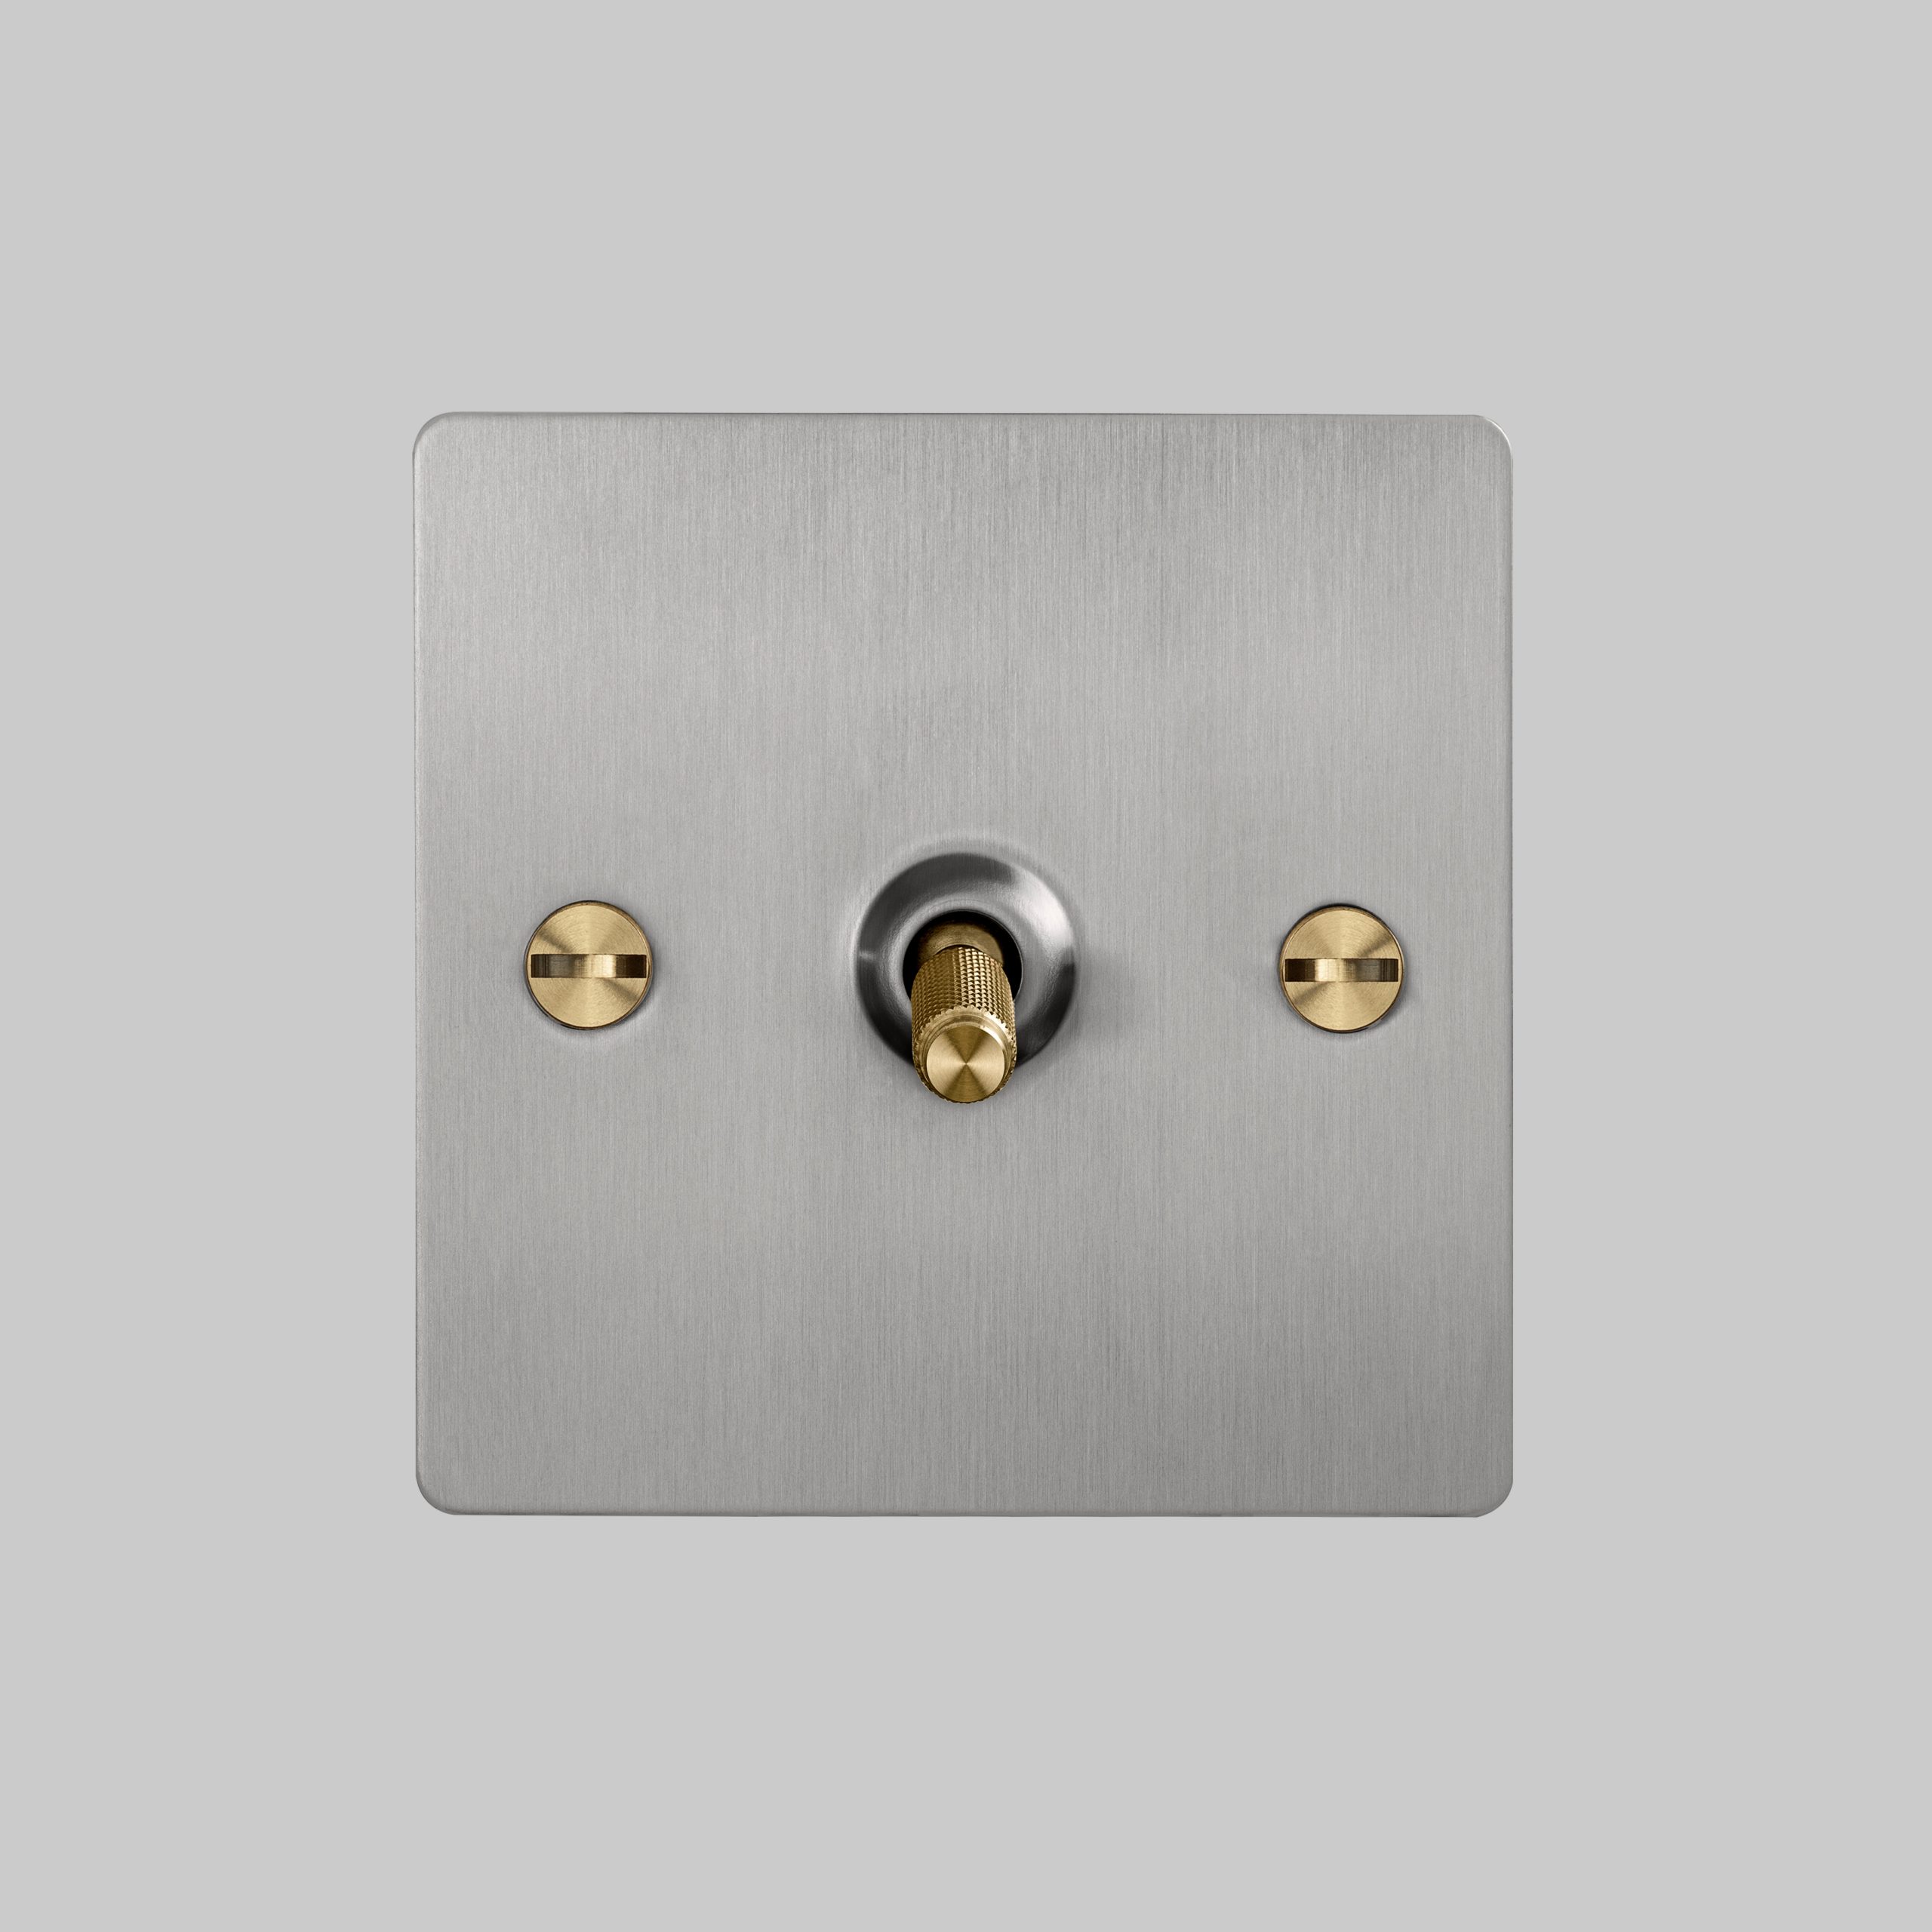 2. 1G_Toggle_Front_Steel_Brass